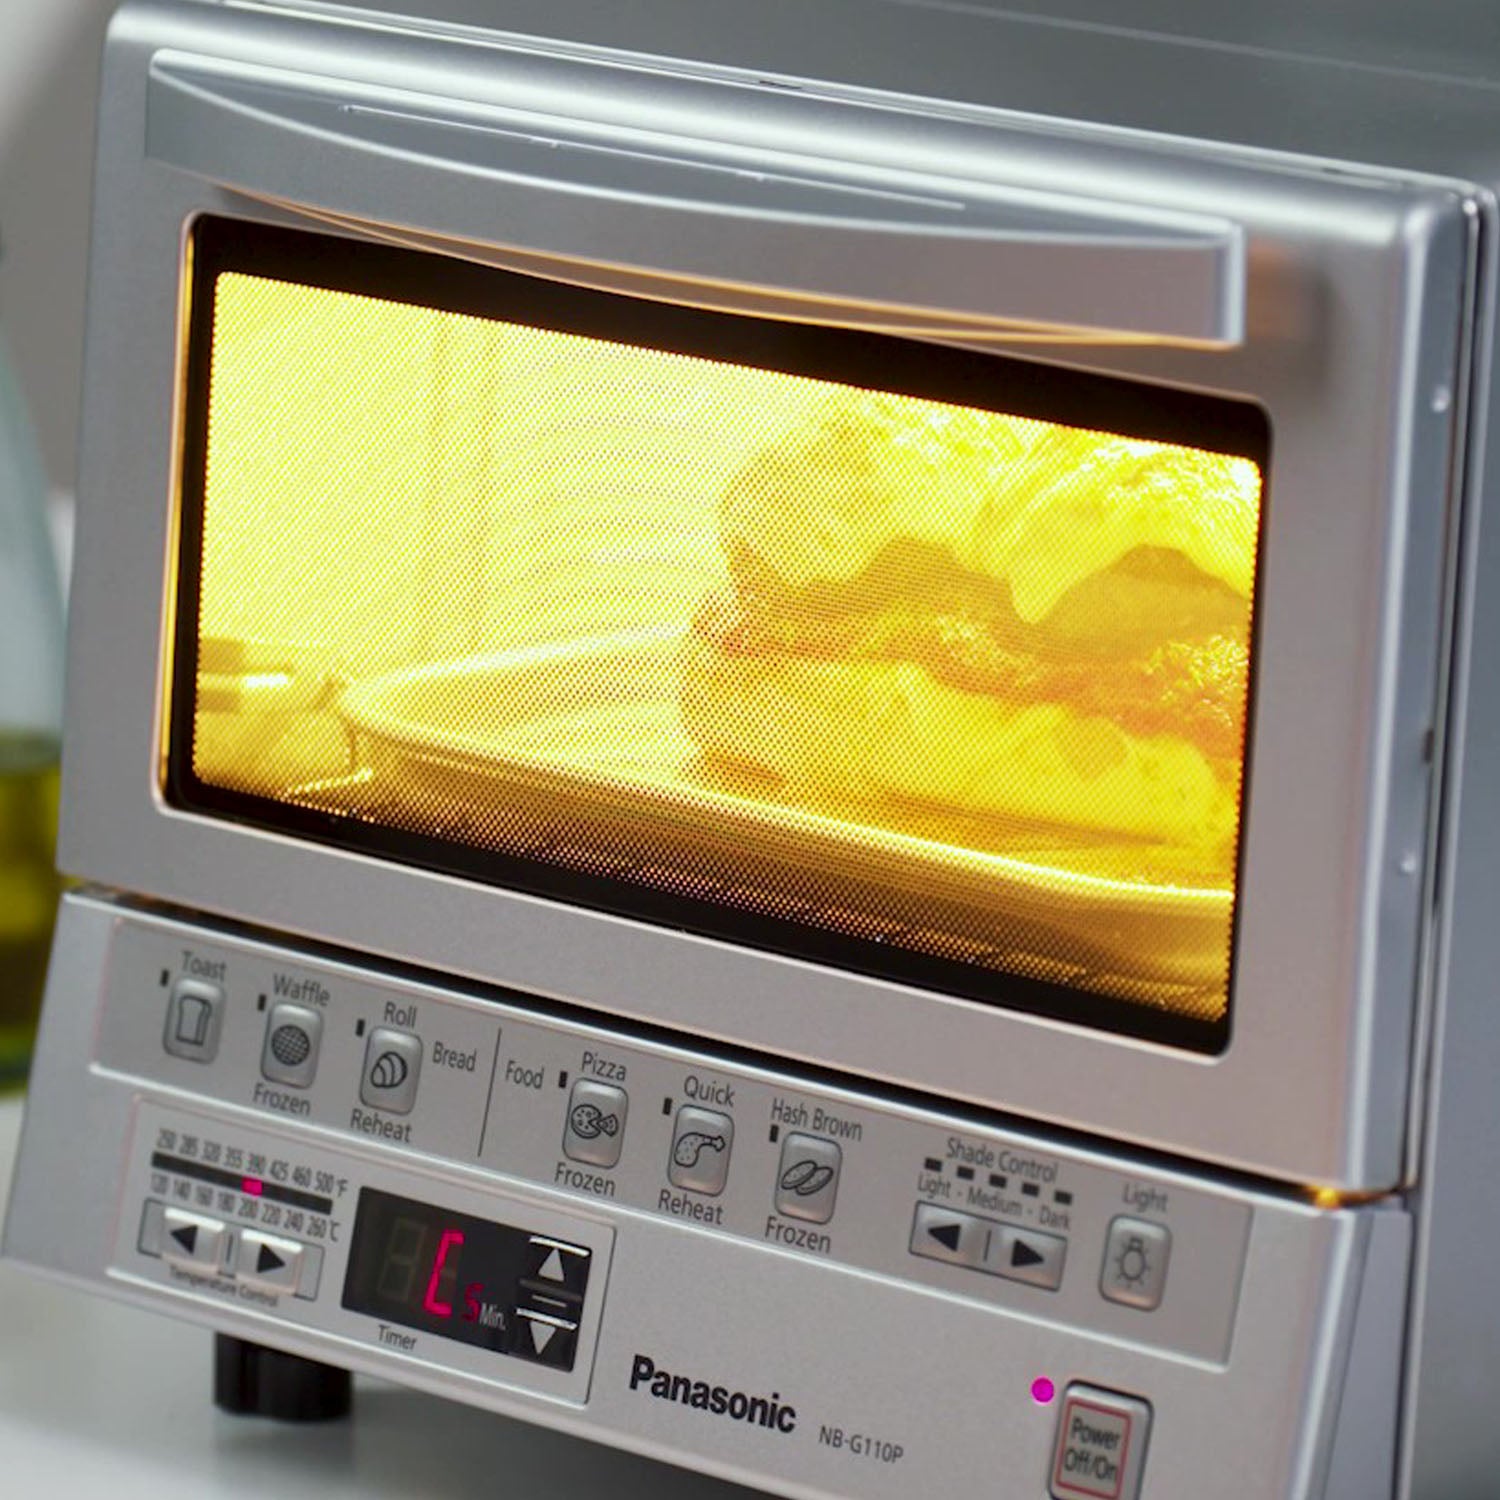 NBG110PW by Panasonic - FlashXpress 1300 Watt G110PW 4 Slice Toaster Oven  with Infrared Heating